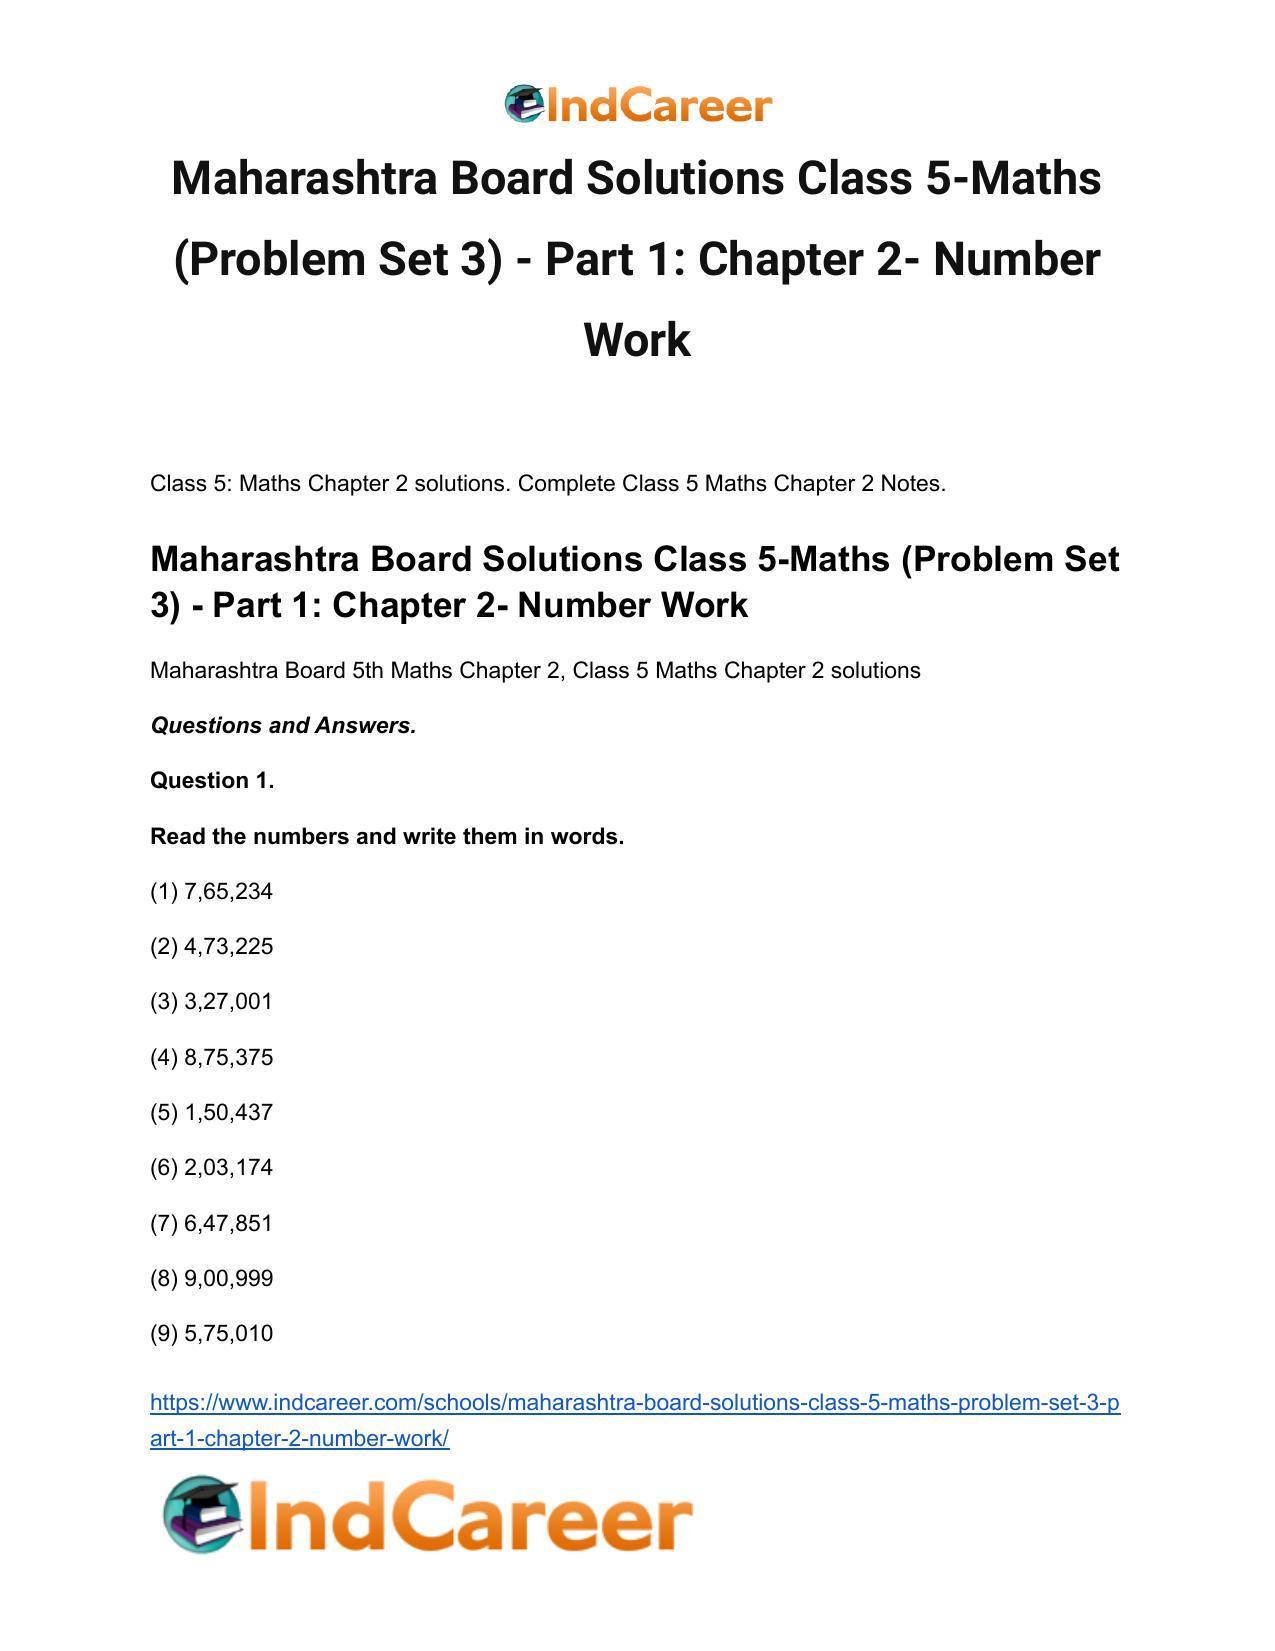 Maharashtra Board Solutions Class 5-Maths (Problem Set 3) - Part 1: Chapter 2- Number Work - Page 2